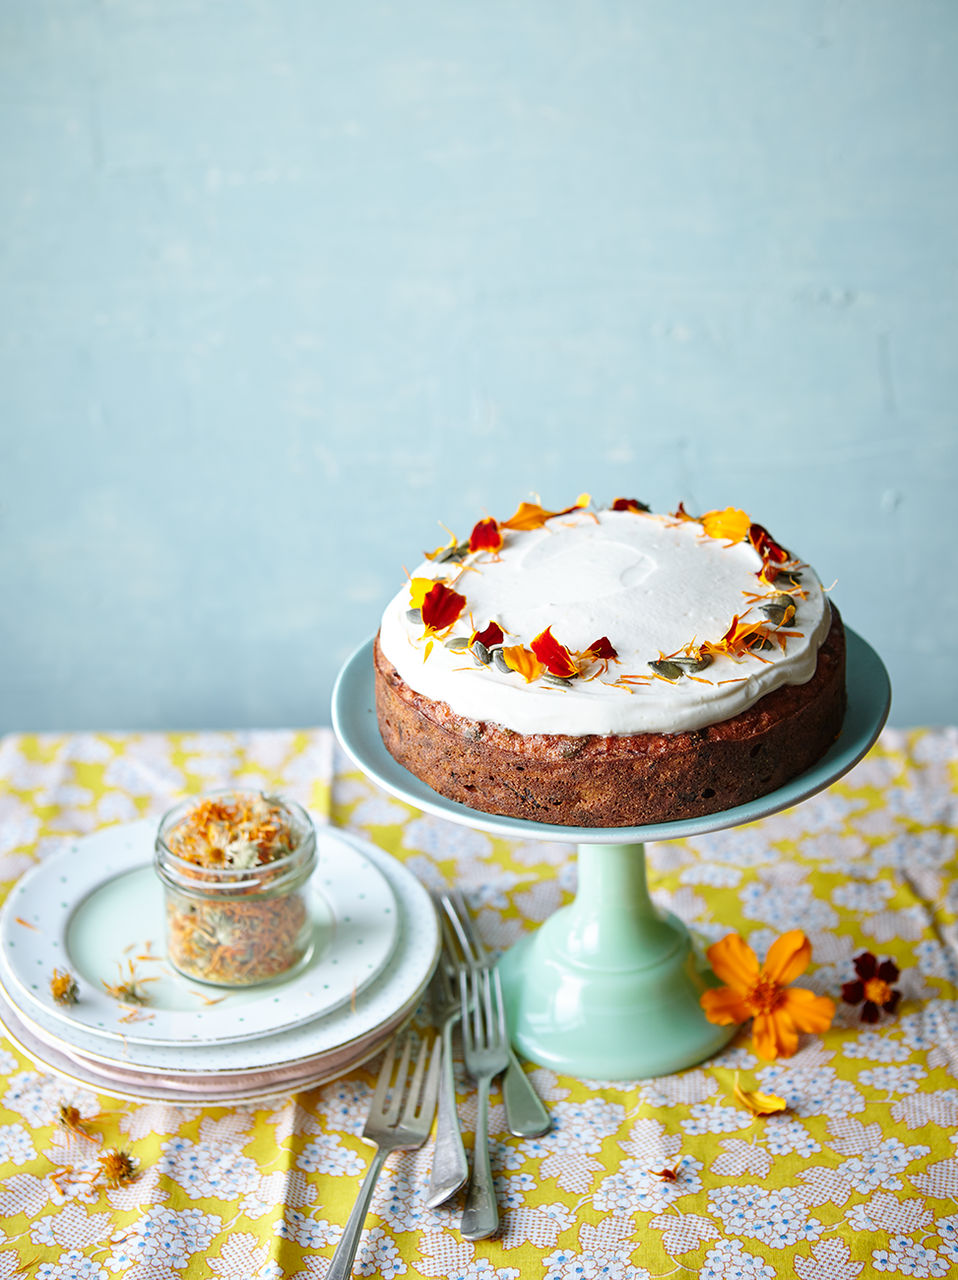 Annie Bell's apricot and almond cake recipe - The Mail